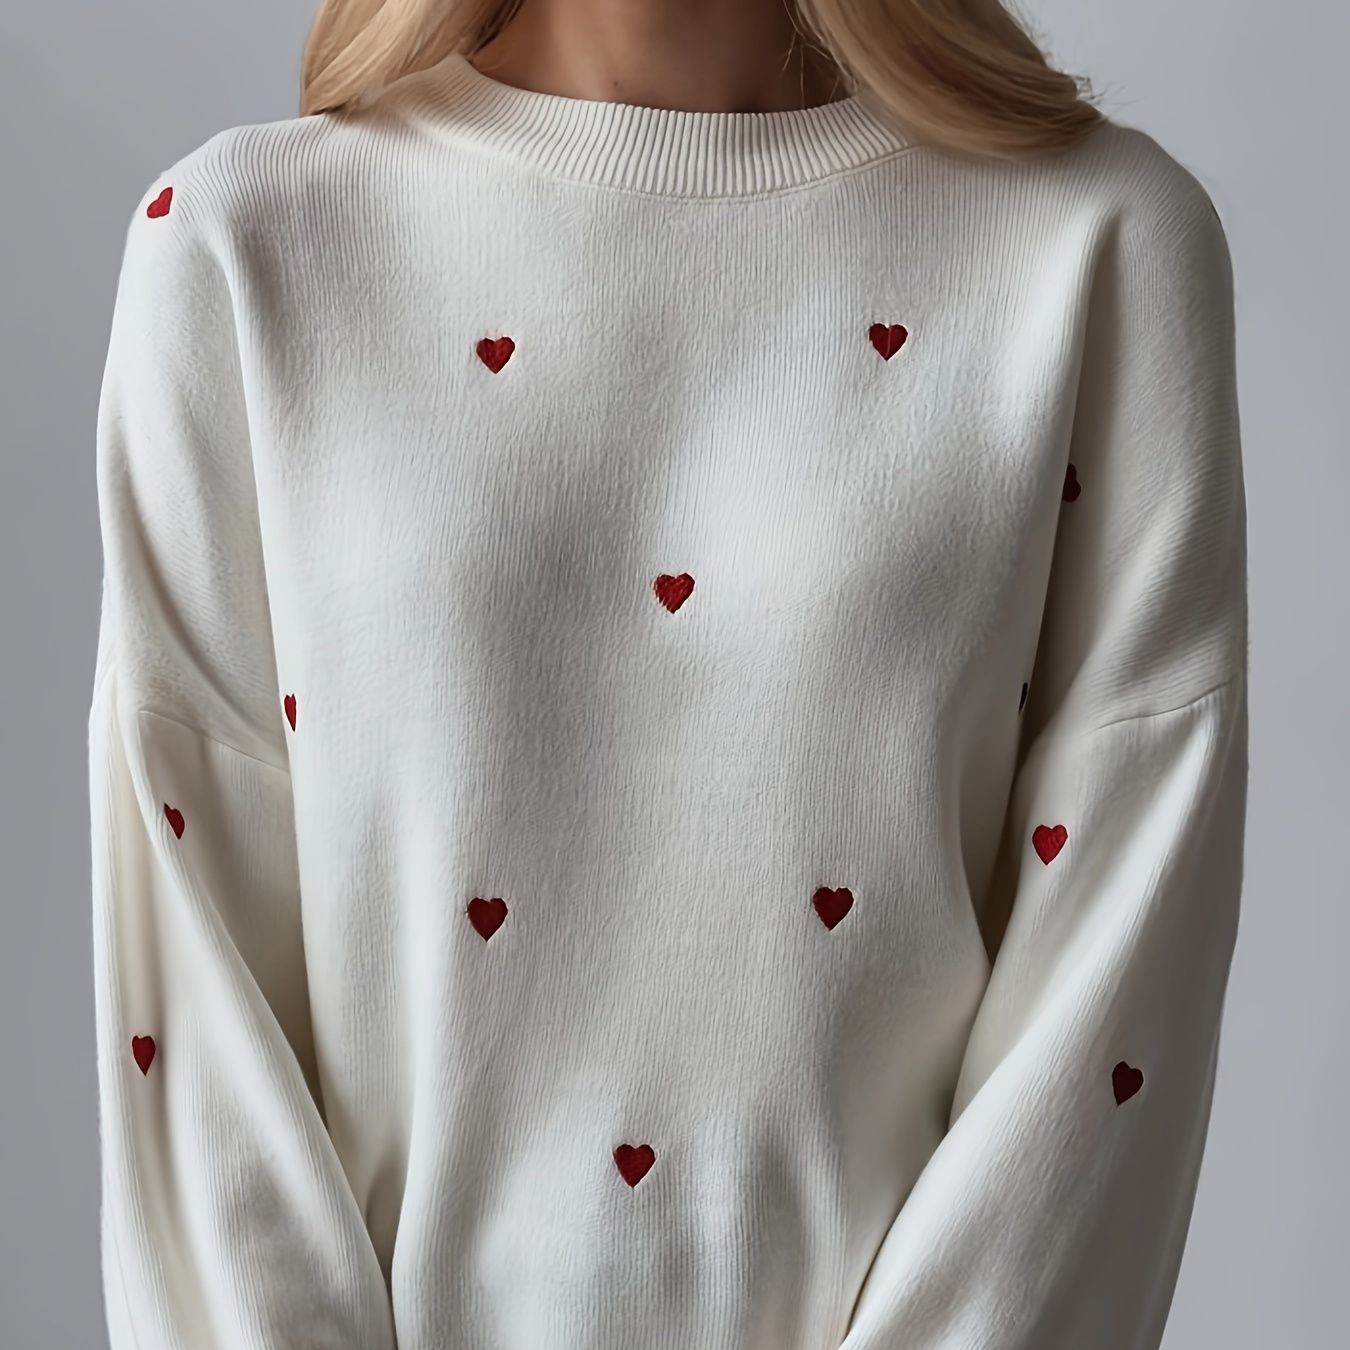 

Valentine's Day Heart Pattern Crew Neck Knit Sweater, Casual Long Sleeve Pullover Sweater, Women's Clothing